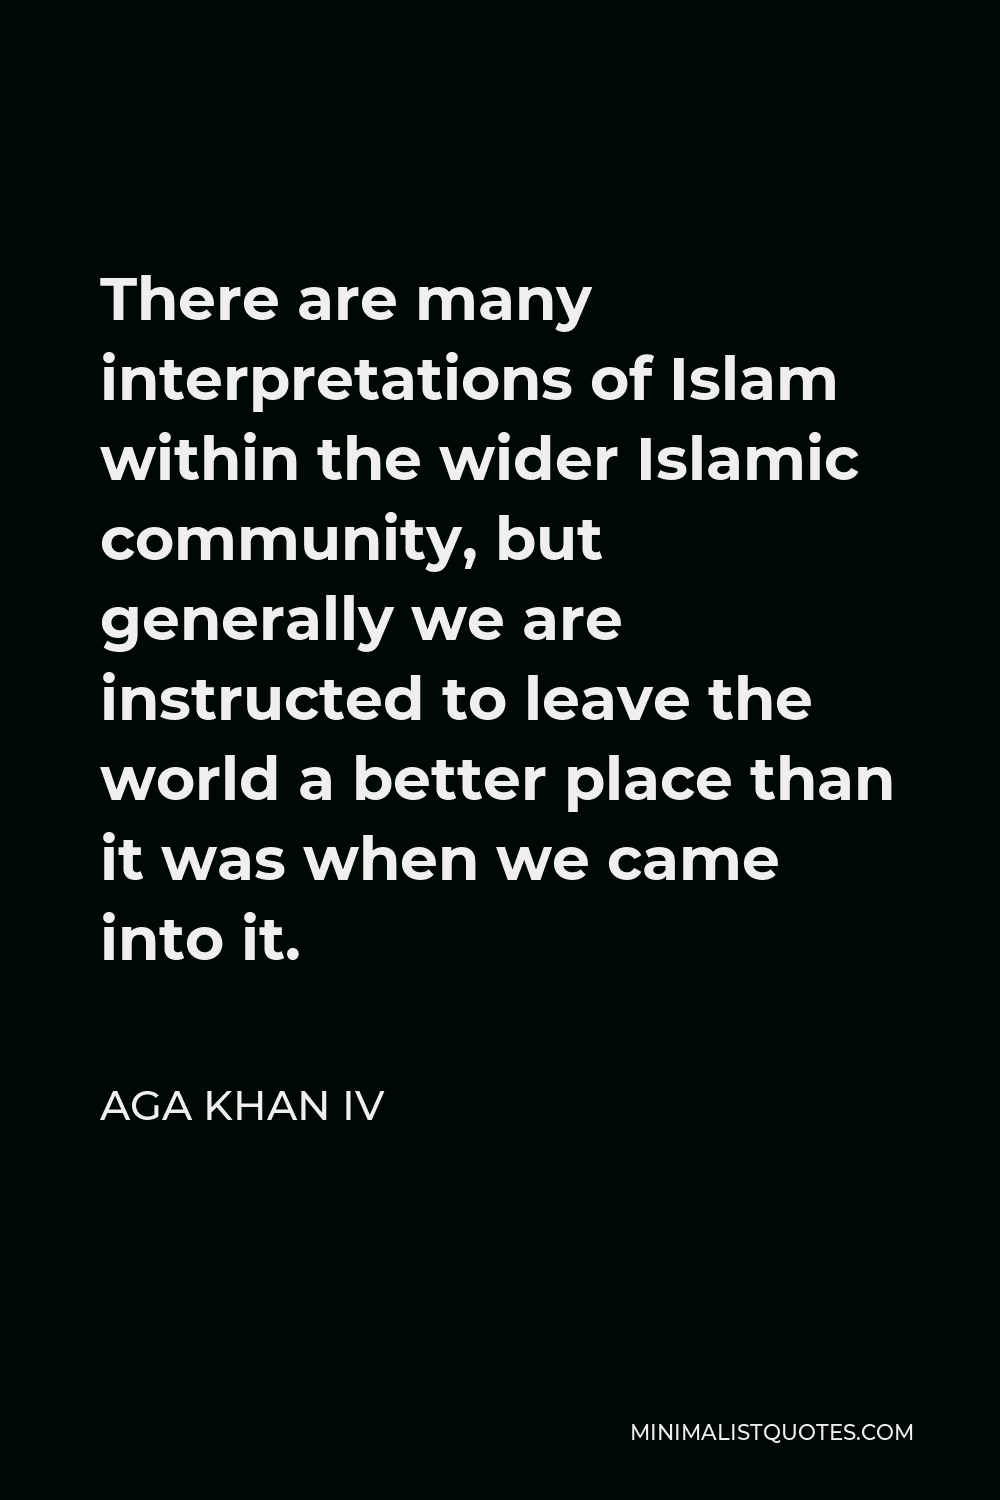 Aga Khan IV Quote - There are many interpretations of Islam within the wider Islamic community, but generally we are instructed to leave the world a better place than it was when we came into it.